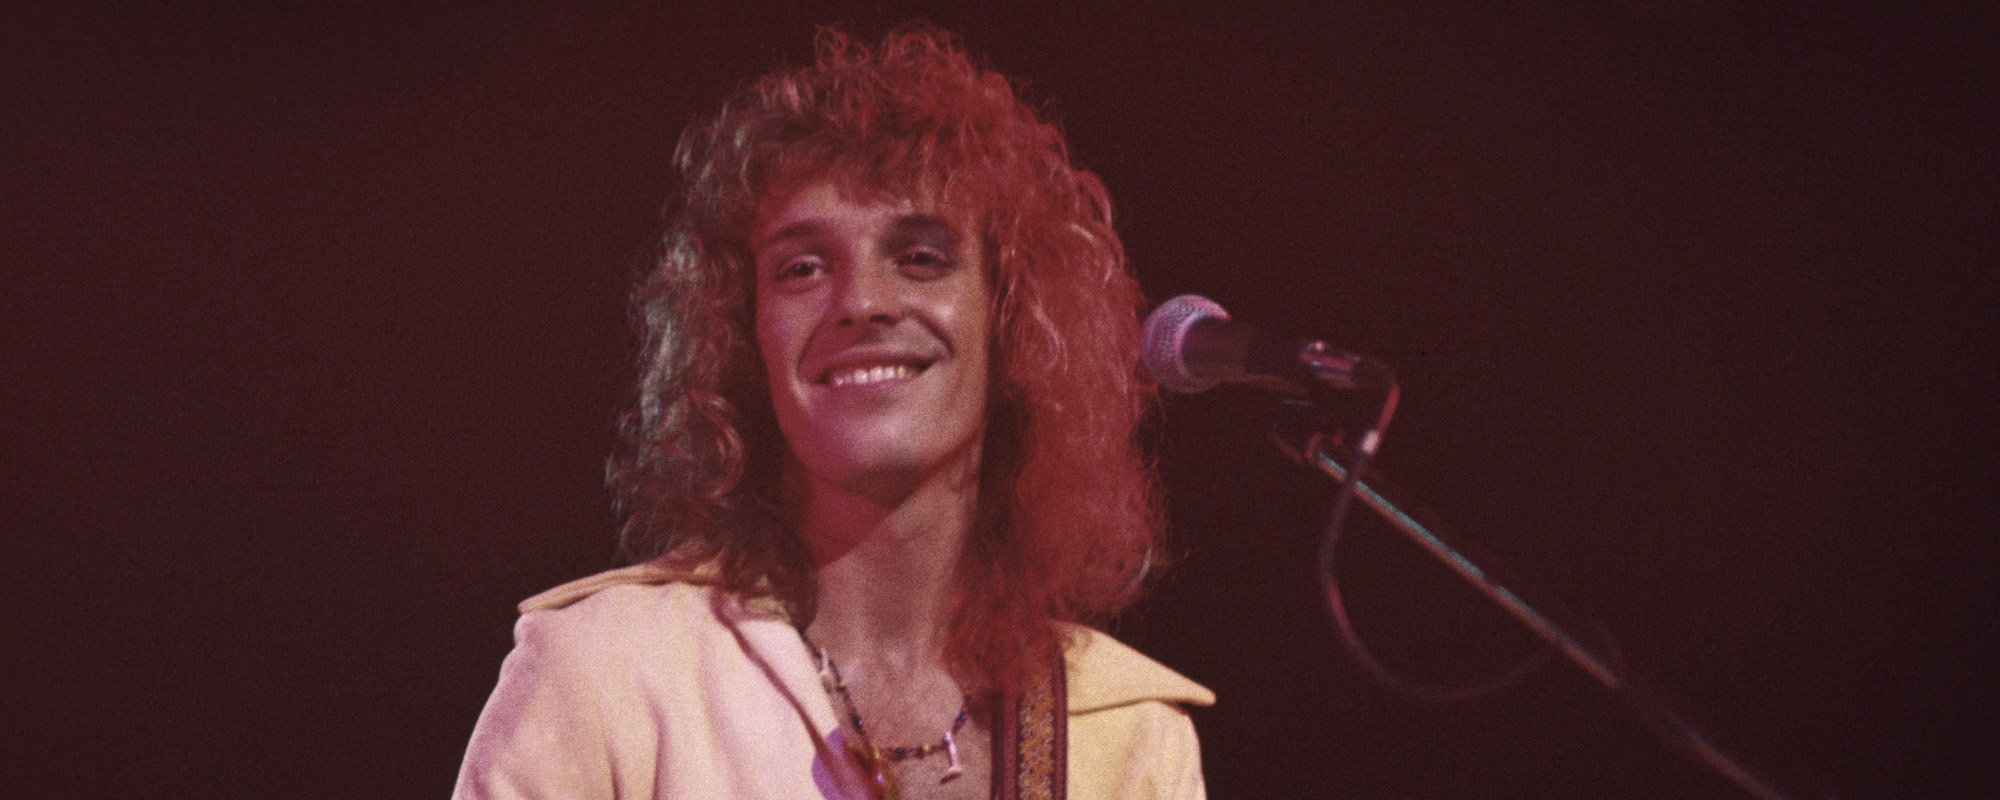 The Meaning Behind “Baby, I Love Your Way” by Peter Frampton and Its Winding Path to Legendary Status